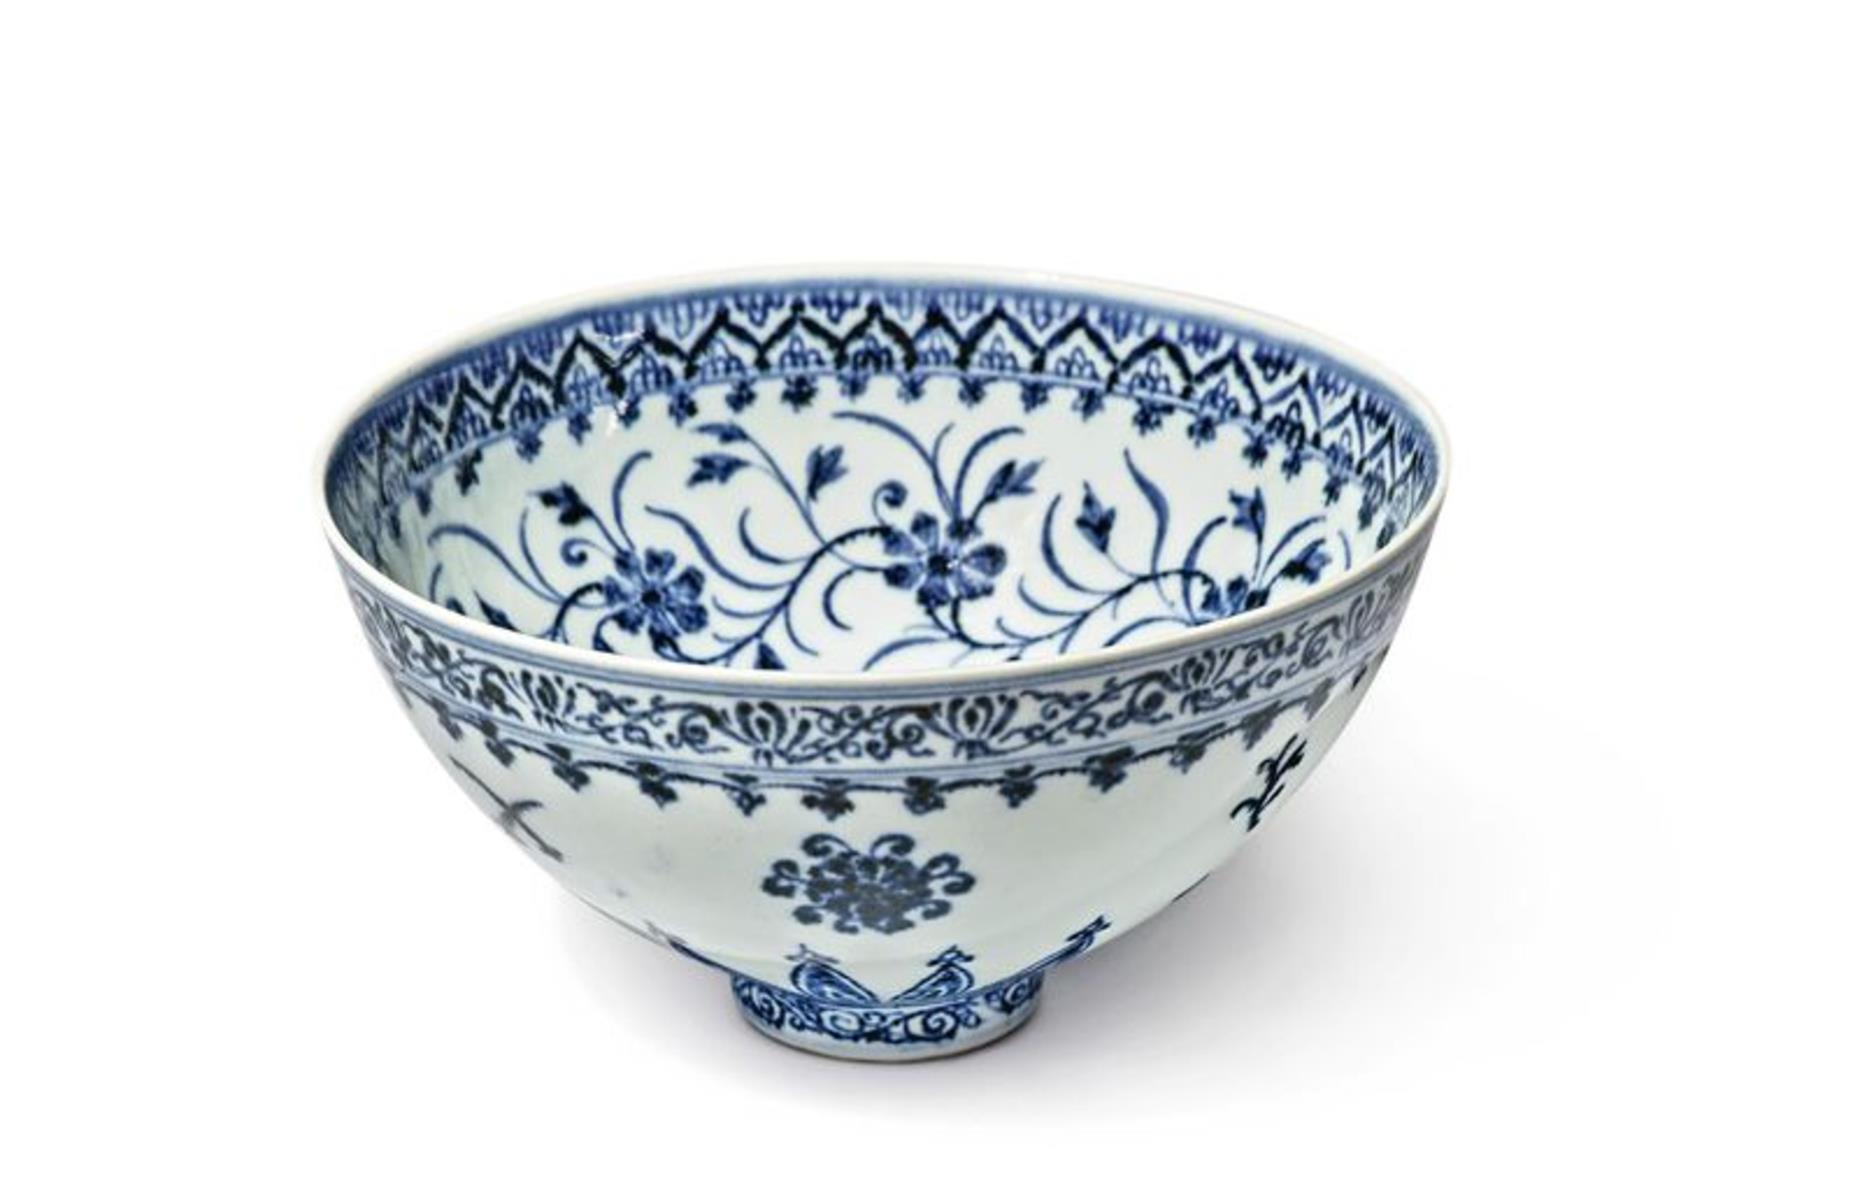 The yard sale Chinese bowl